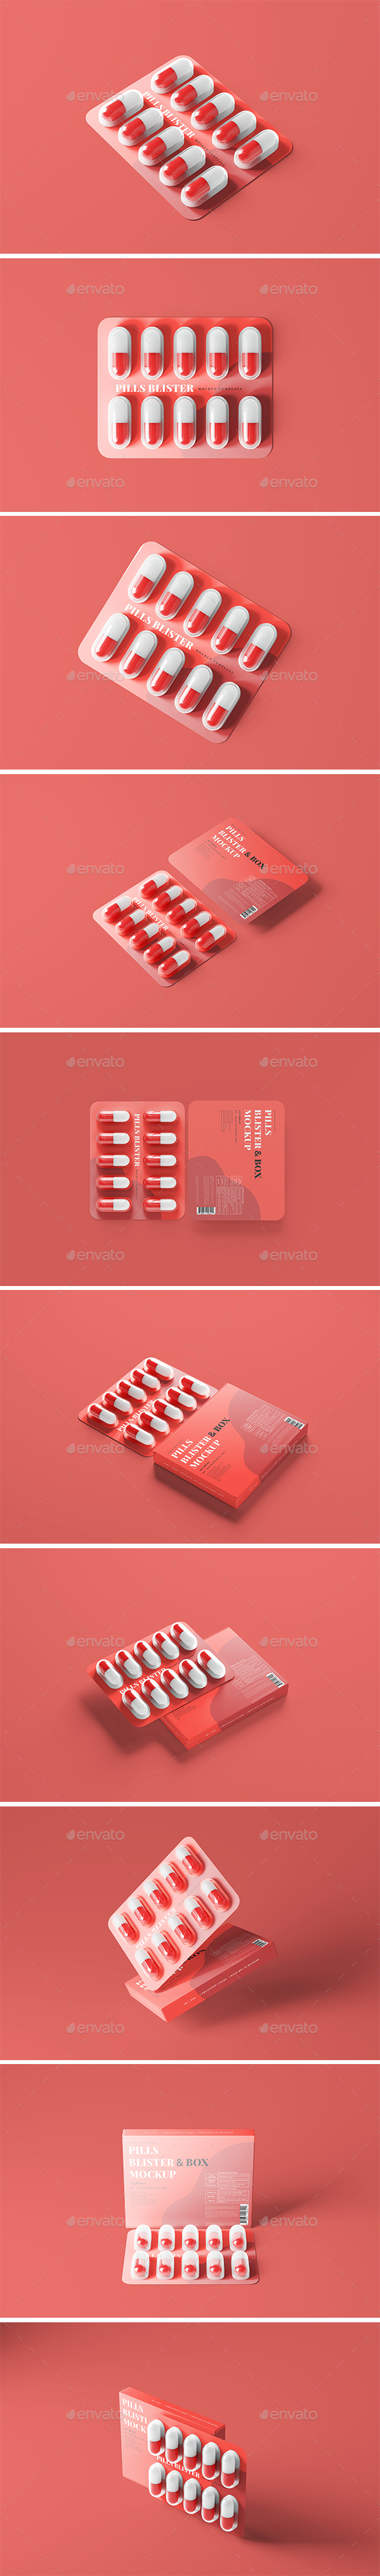 Capsule Blister with Box Mockup